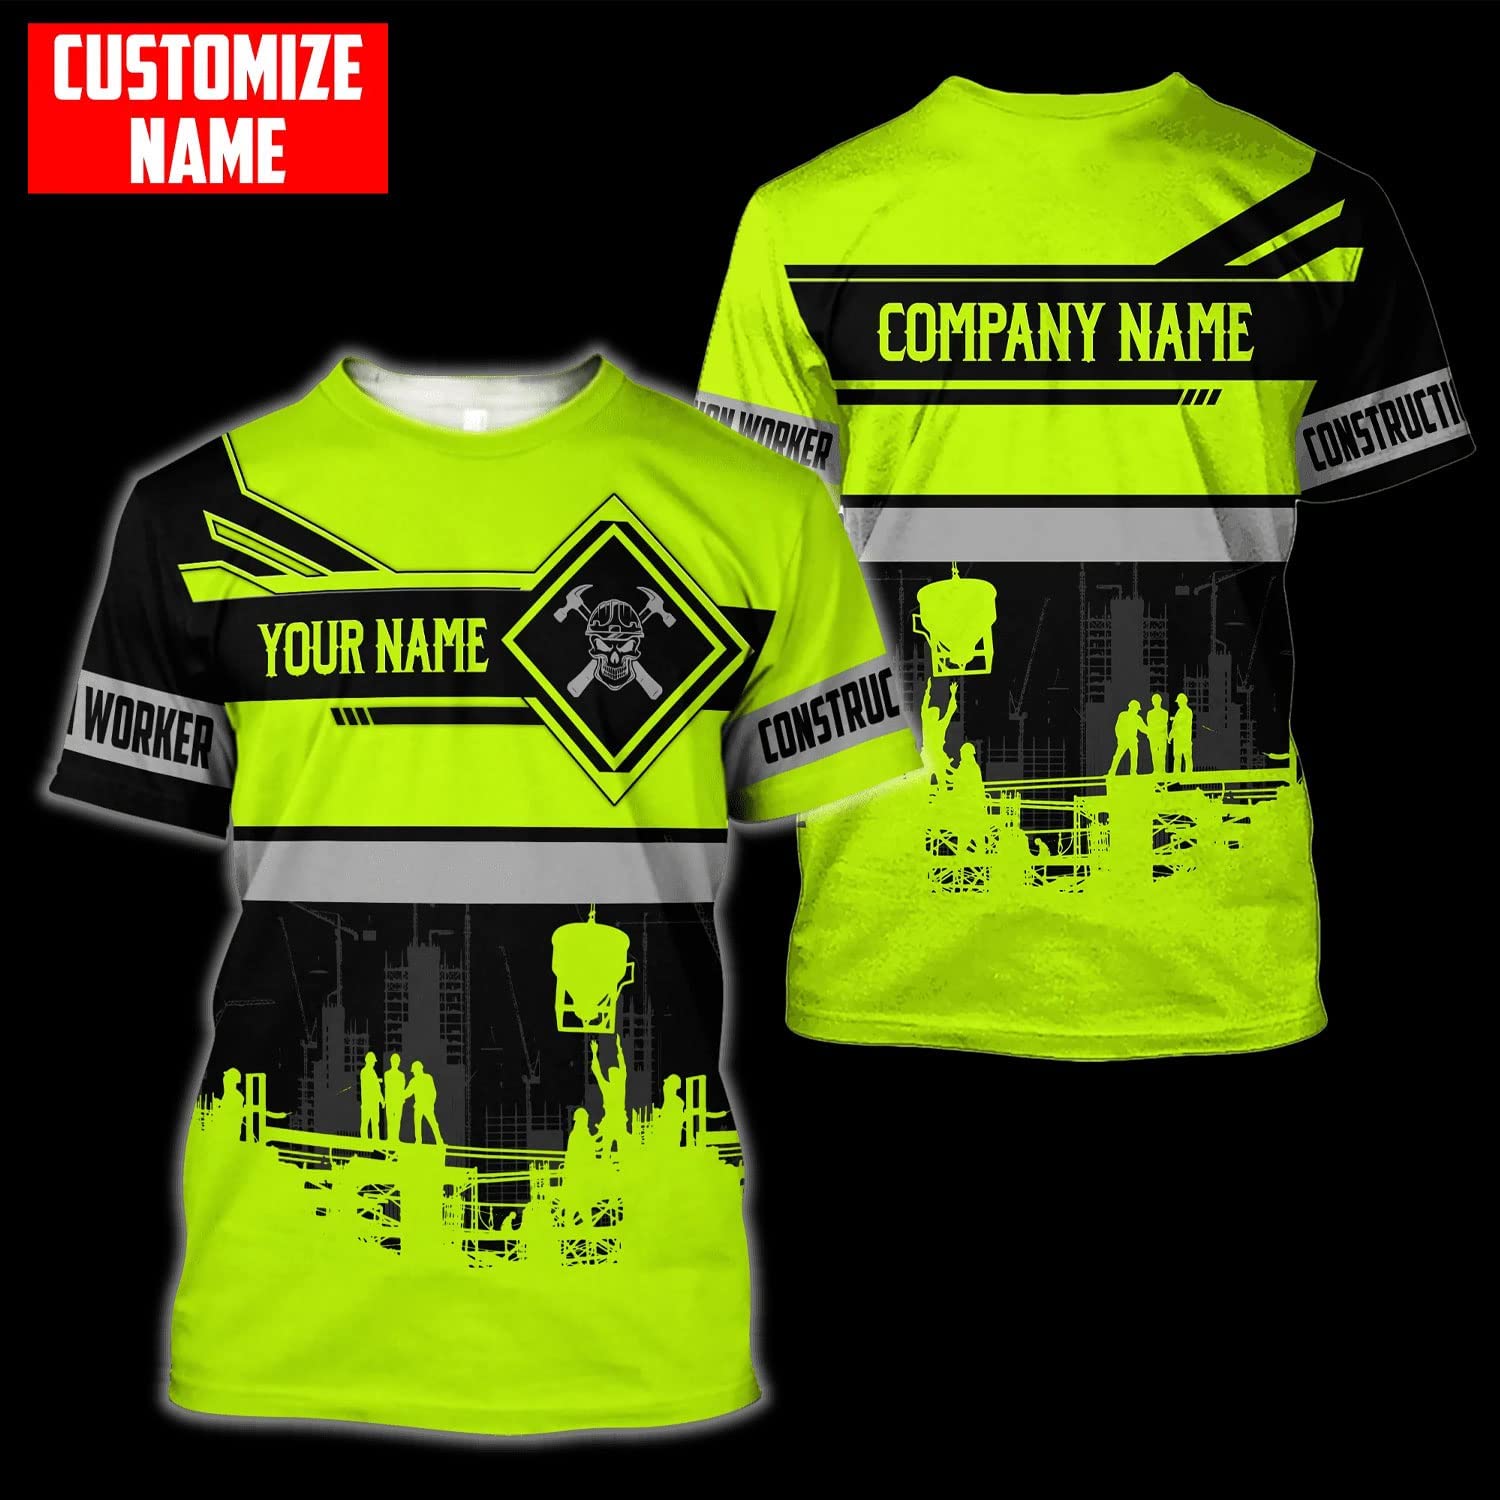 personalized 3d printed green shirt for construction workers a unique gift for 3d printing enthusiasts featuring construction themed designs on hawaiian shirts sweatshirts hoodies and zip hoodi wrvkf